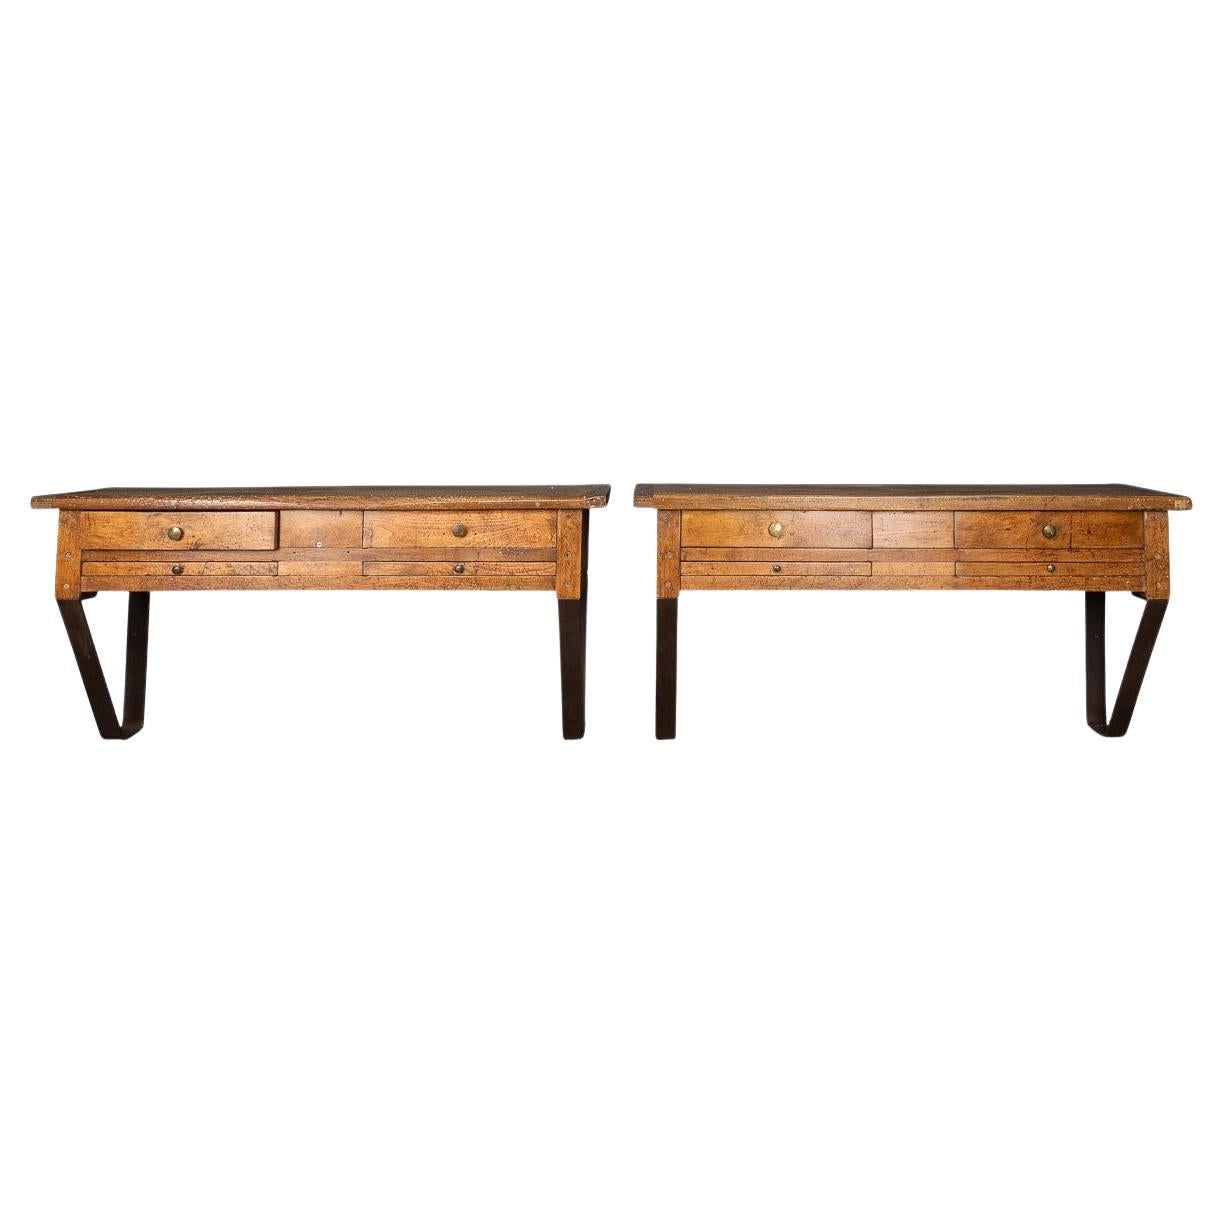 20th Century French Walnut Jewellery Makers Benches, c.1920